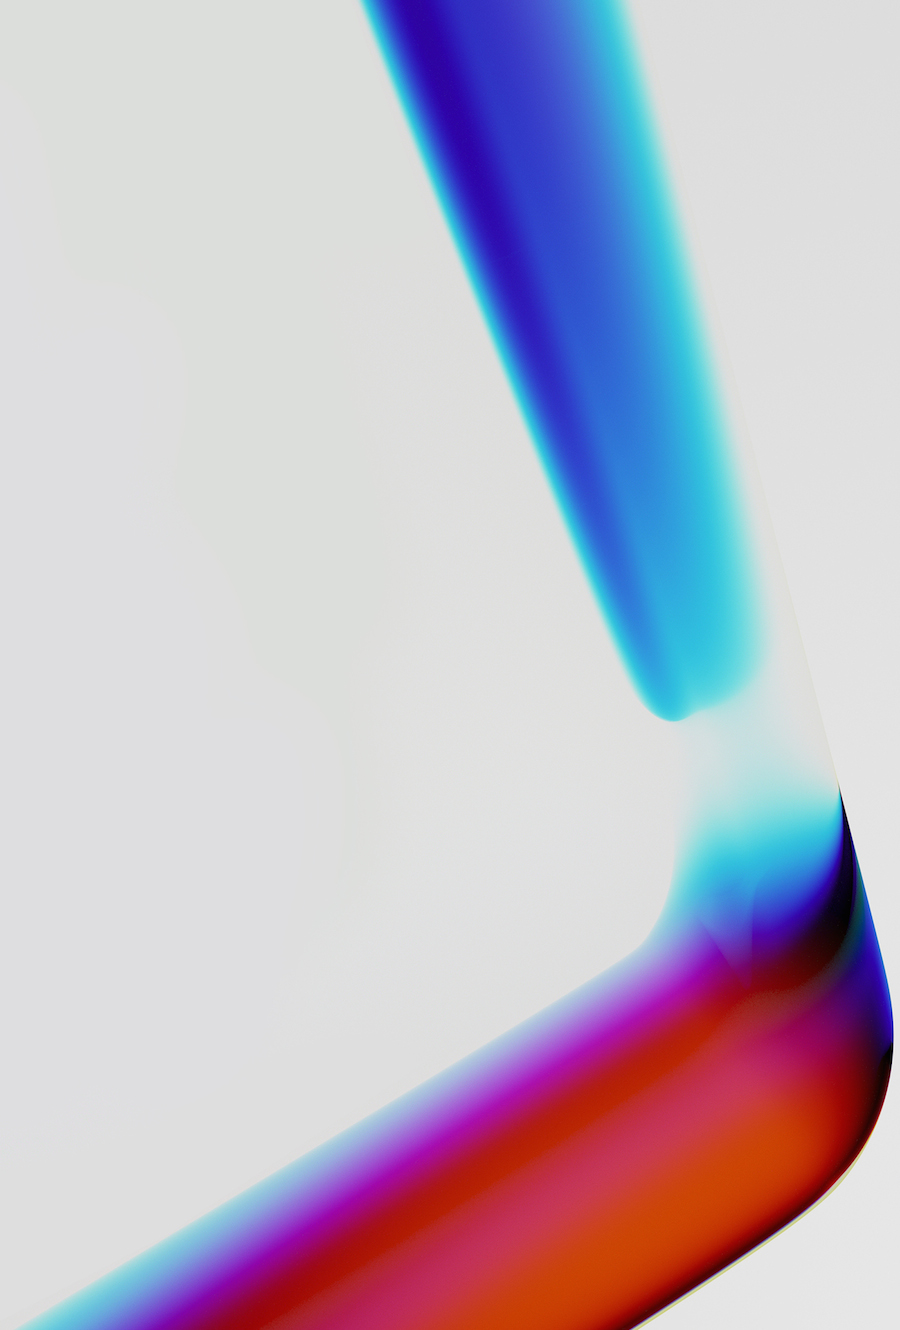 Abstract Pictures of Chromatic Light Transitions-6